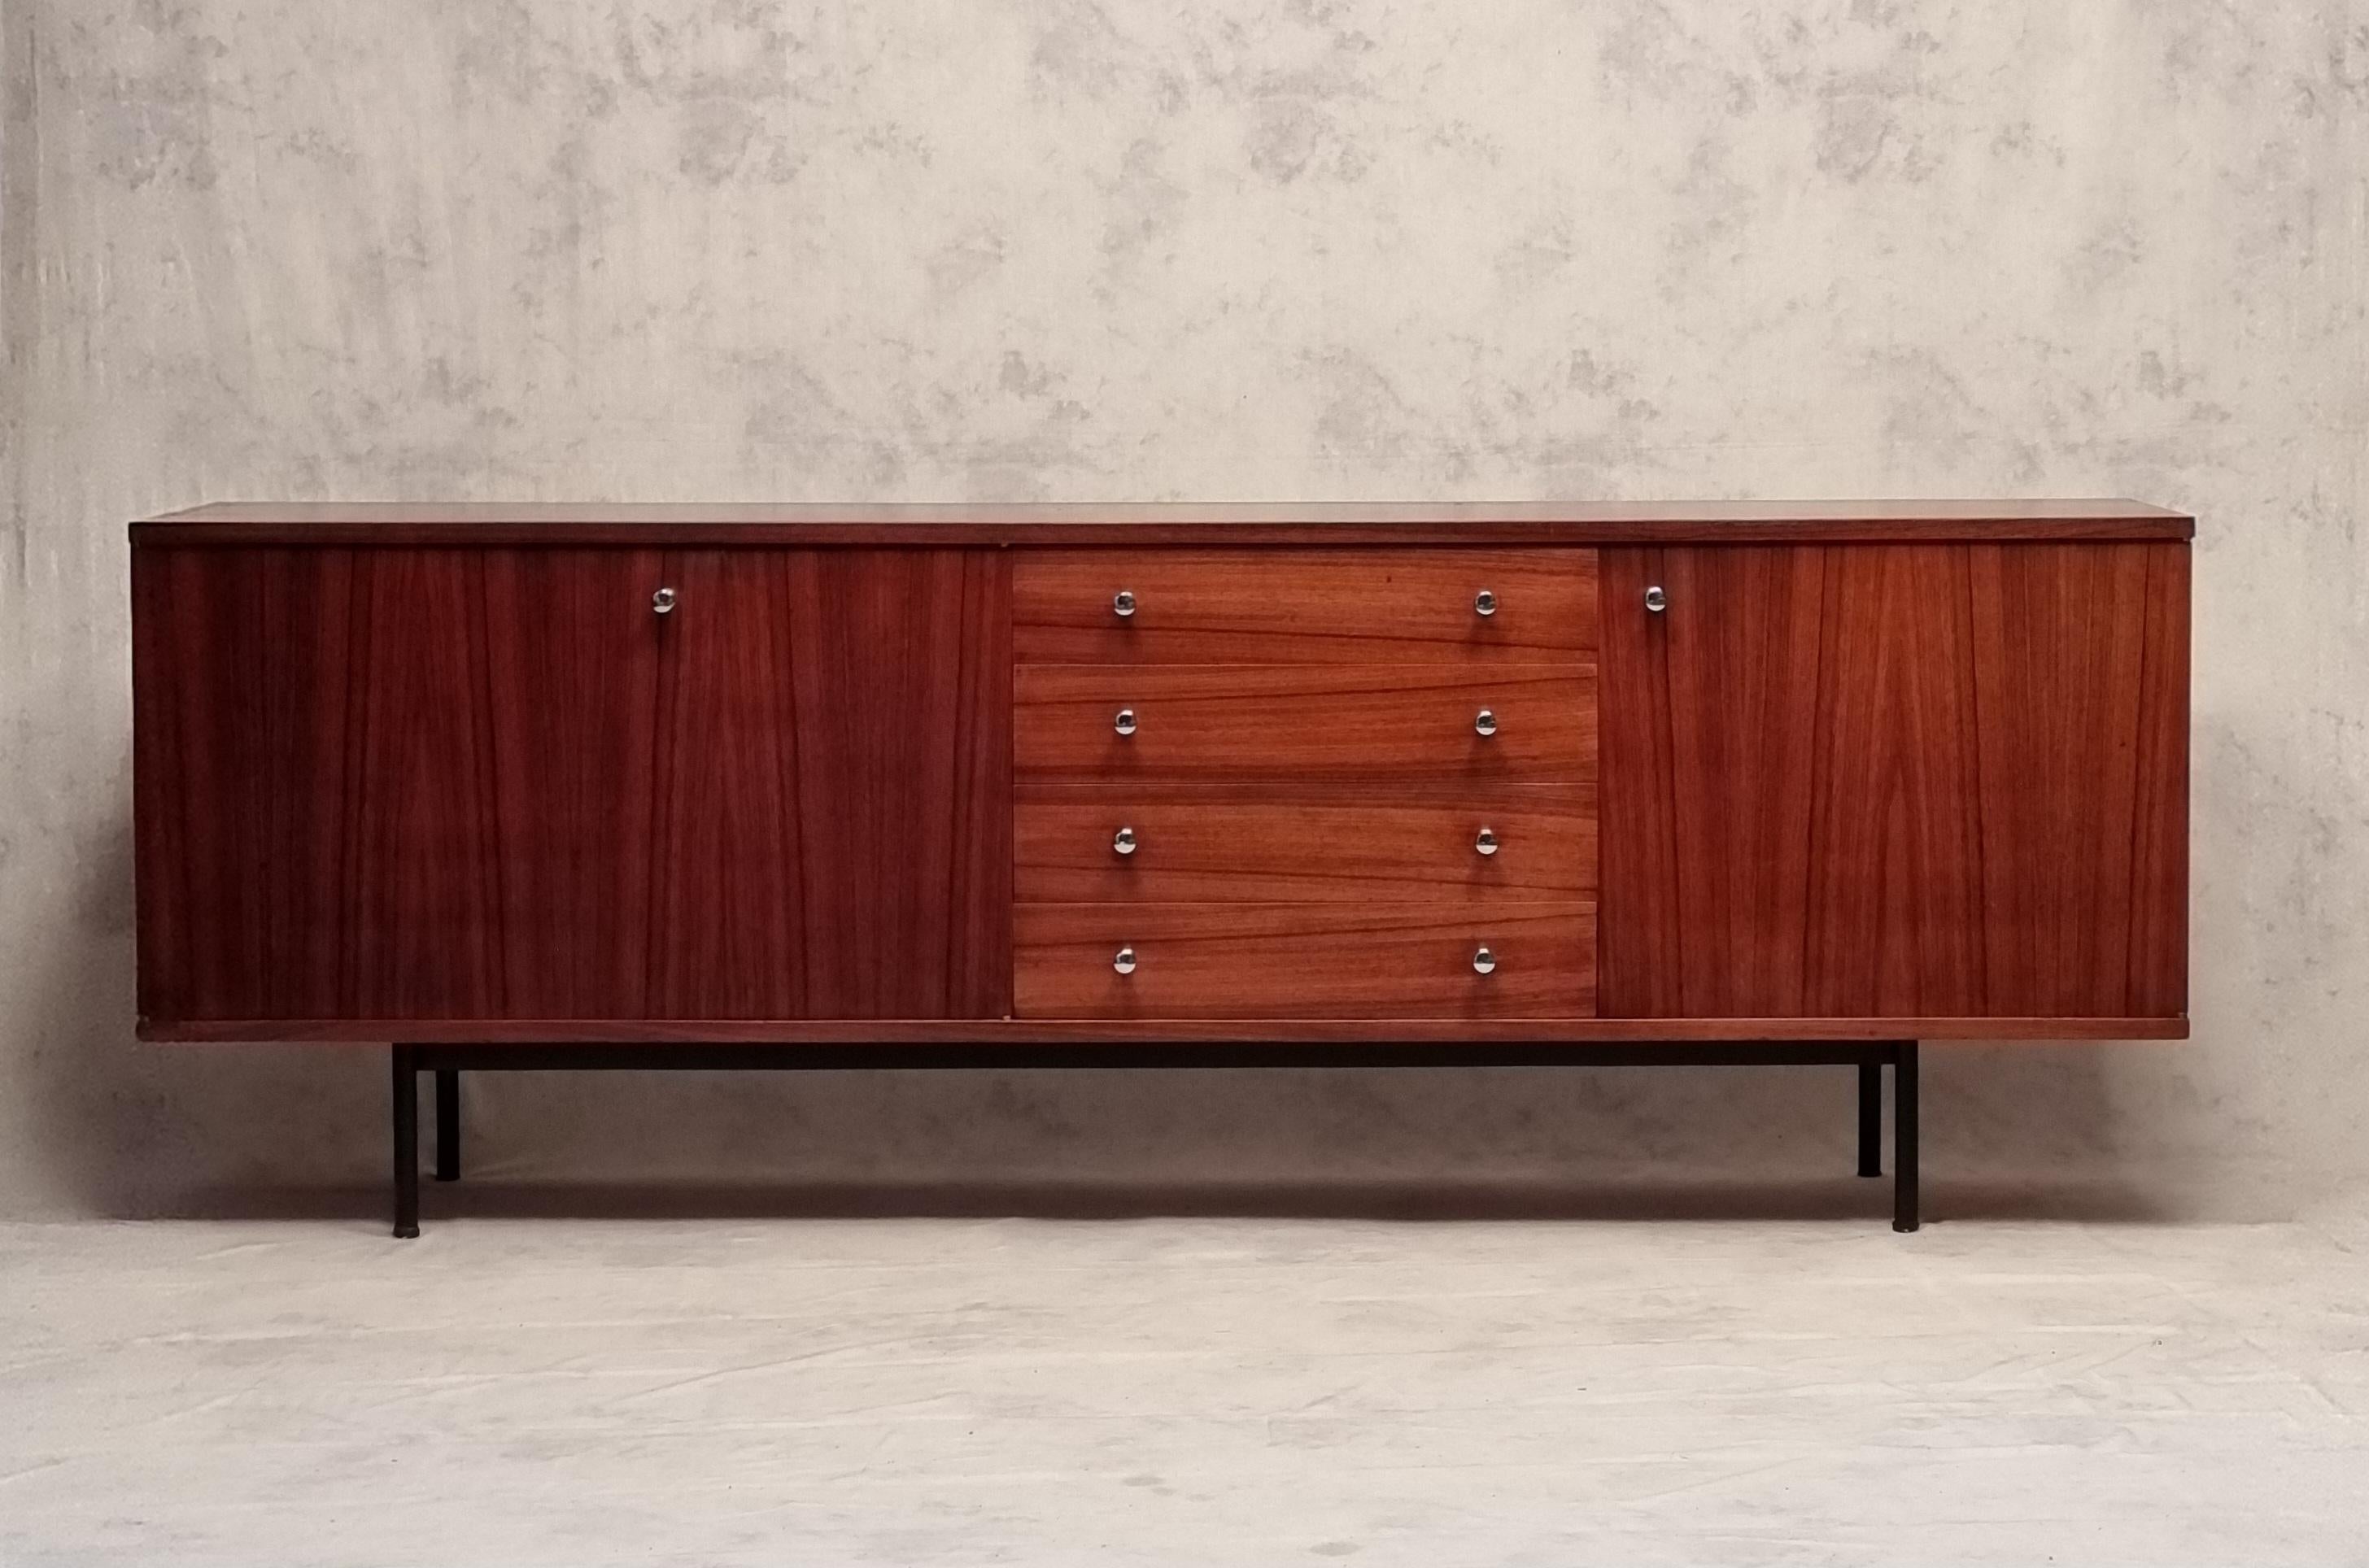 Superb modernist sideboard by French designer Alain Richard published by Meubles TV in the 1950s. Alain Richard is one of the greatest French designers who dazzled French furniture from the 1950s-1970s with his creativity. Spearhead of French